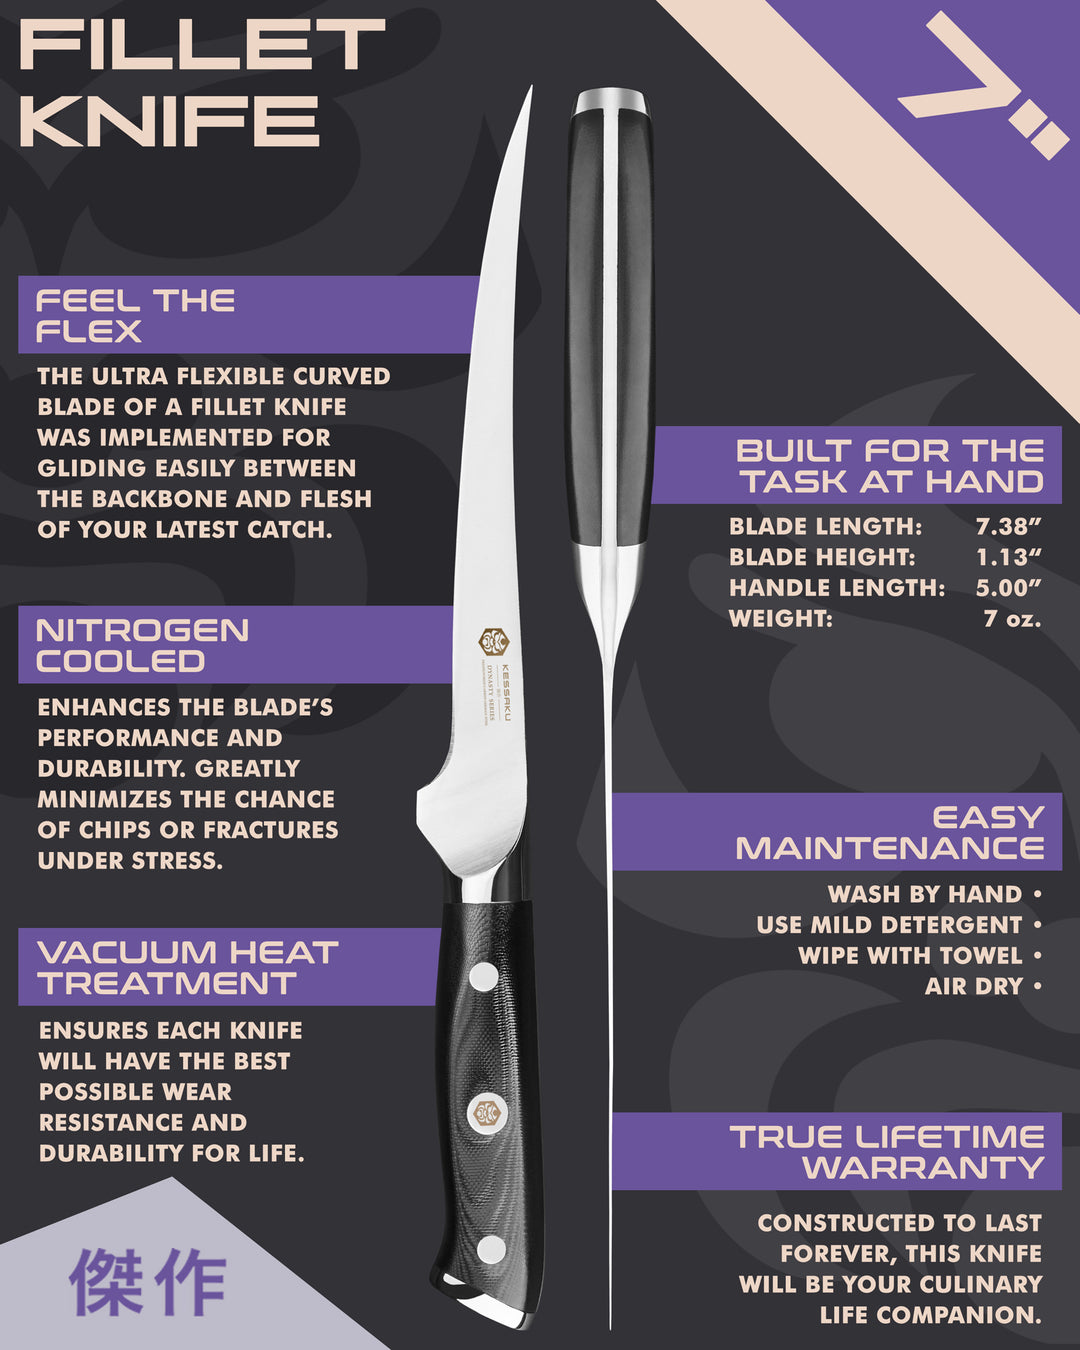 Kessaku Dynasty Series Fillet Knife uses, dimensions, maintenance, warranty info, and additional blade treatments